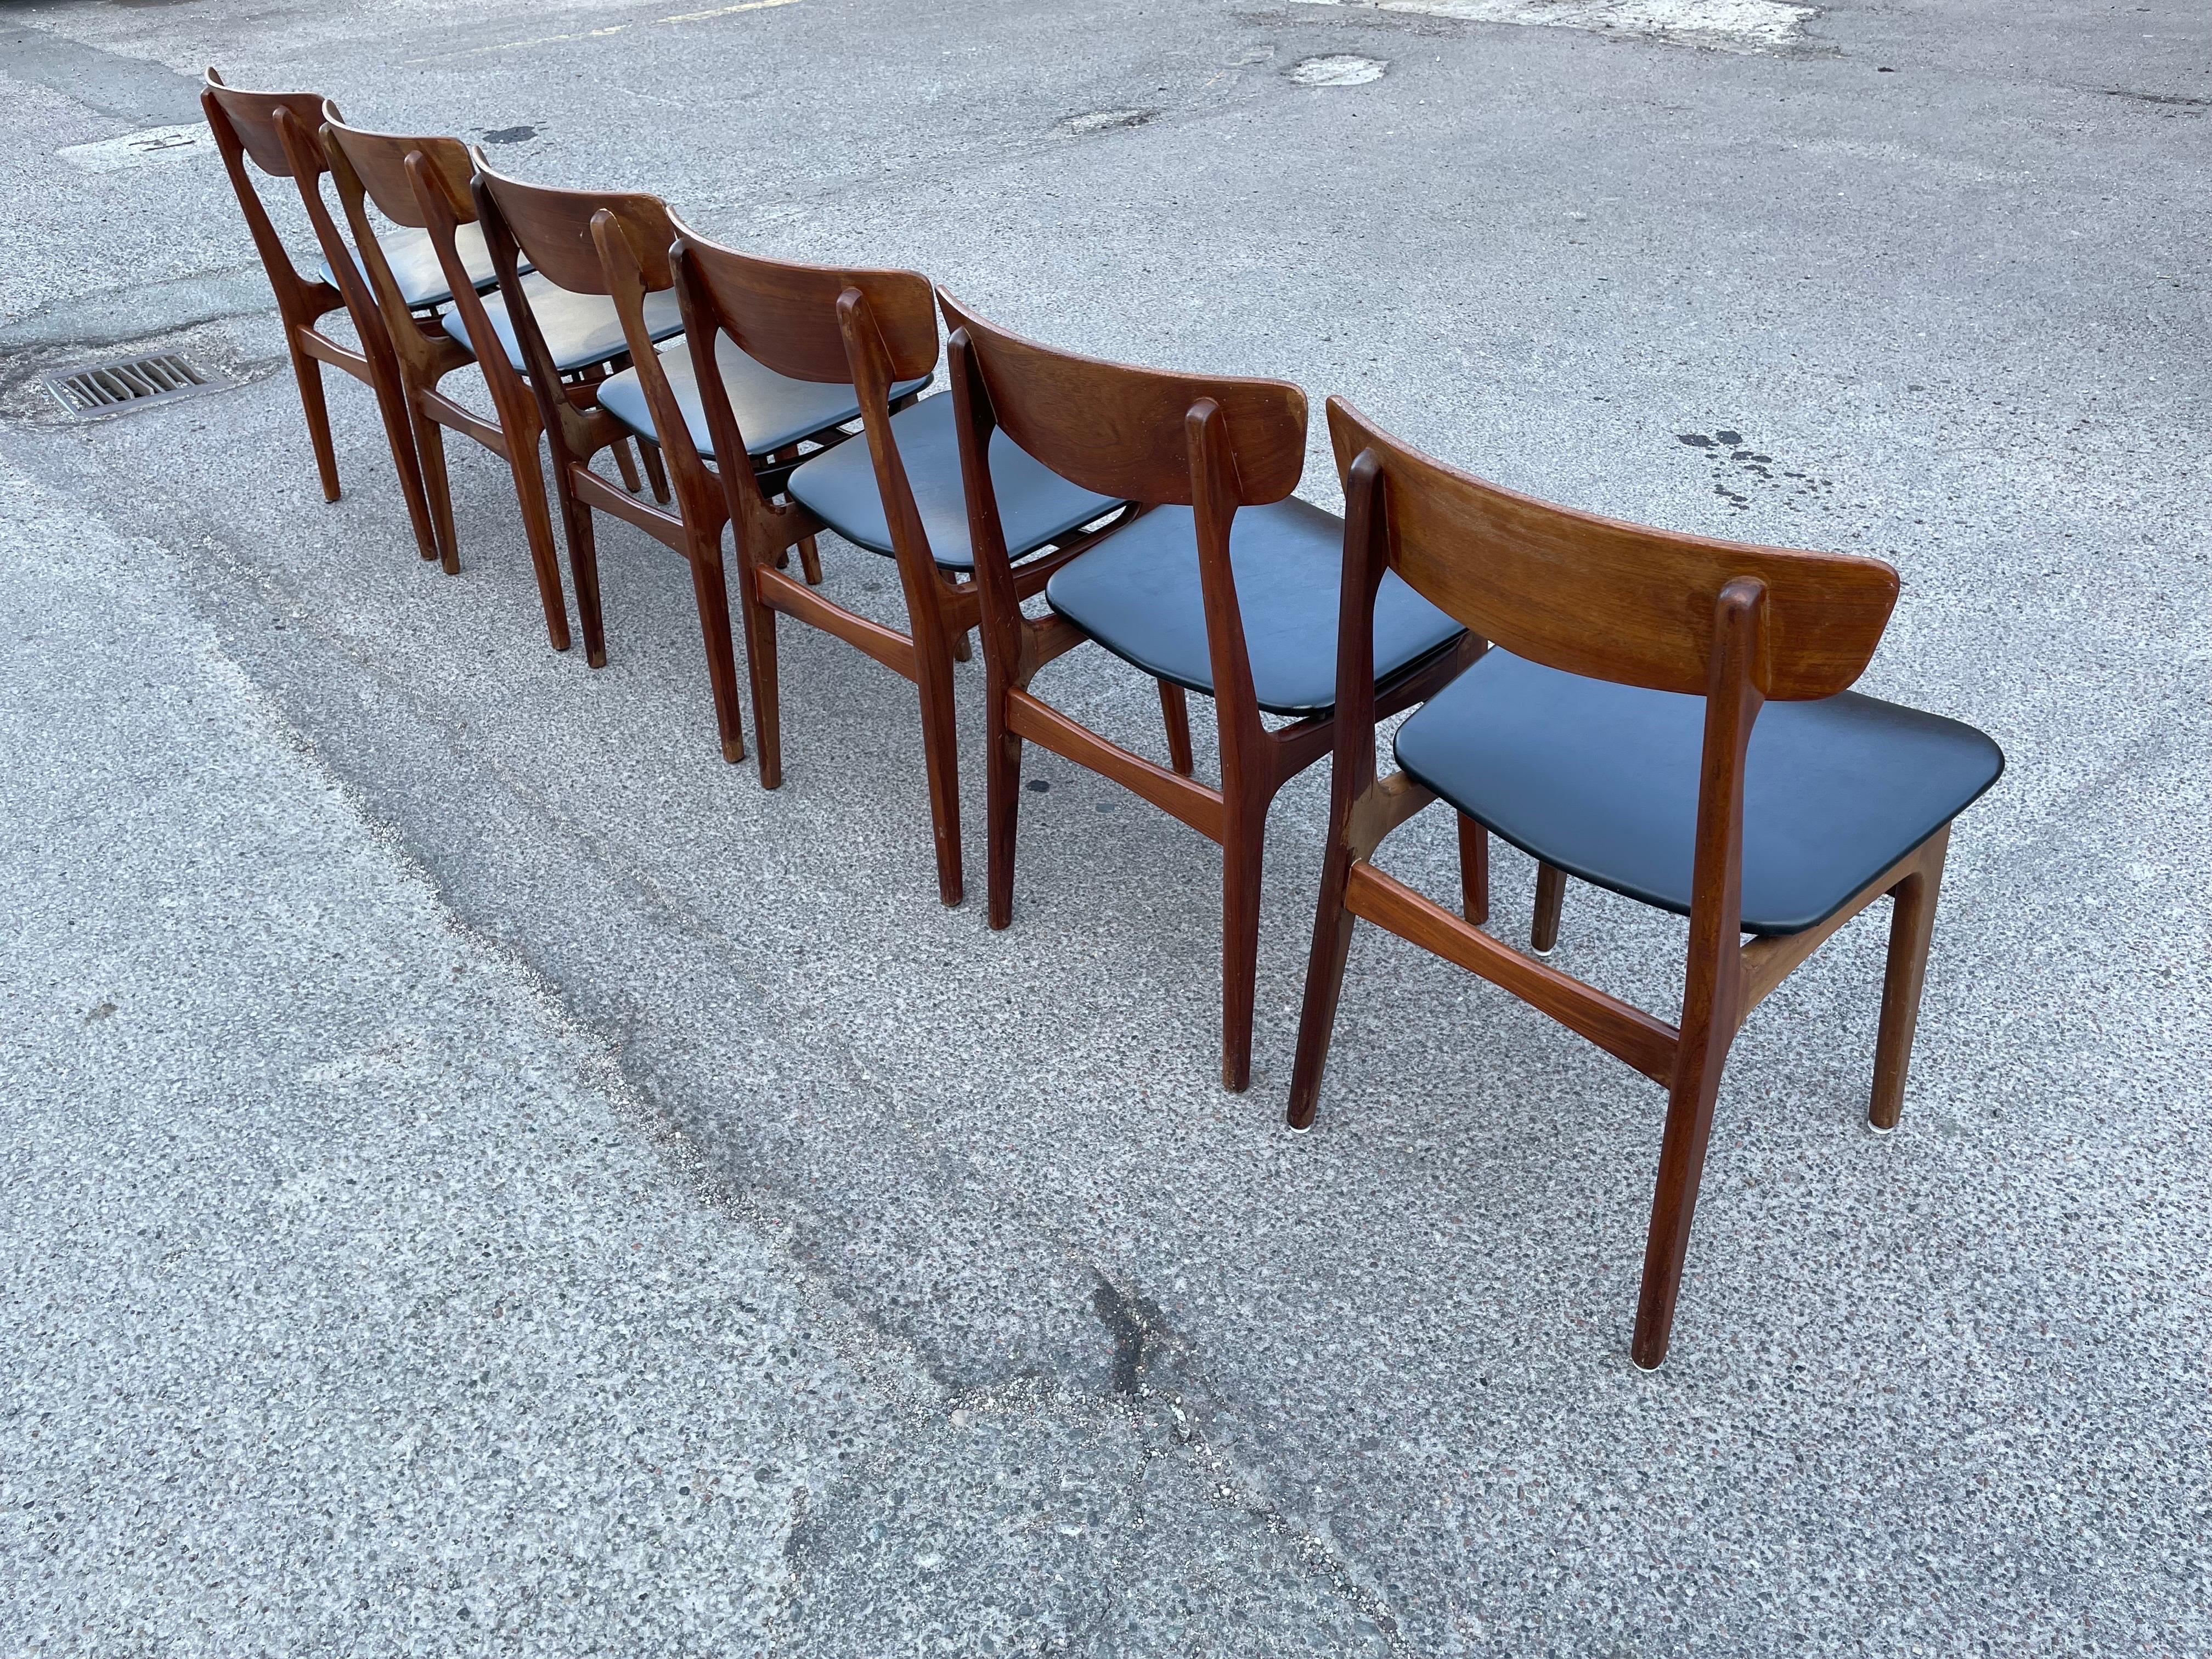 Introducing a stunning set of six mid-century Danish chairs—a true testament to the iconic design of the 1960s. Crafted in teak by the renowned Schiønning & Elgaard, these chairs exude a captivating blend of elegance and comfort.

The rich, warm